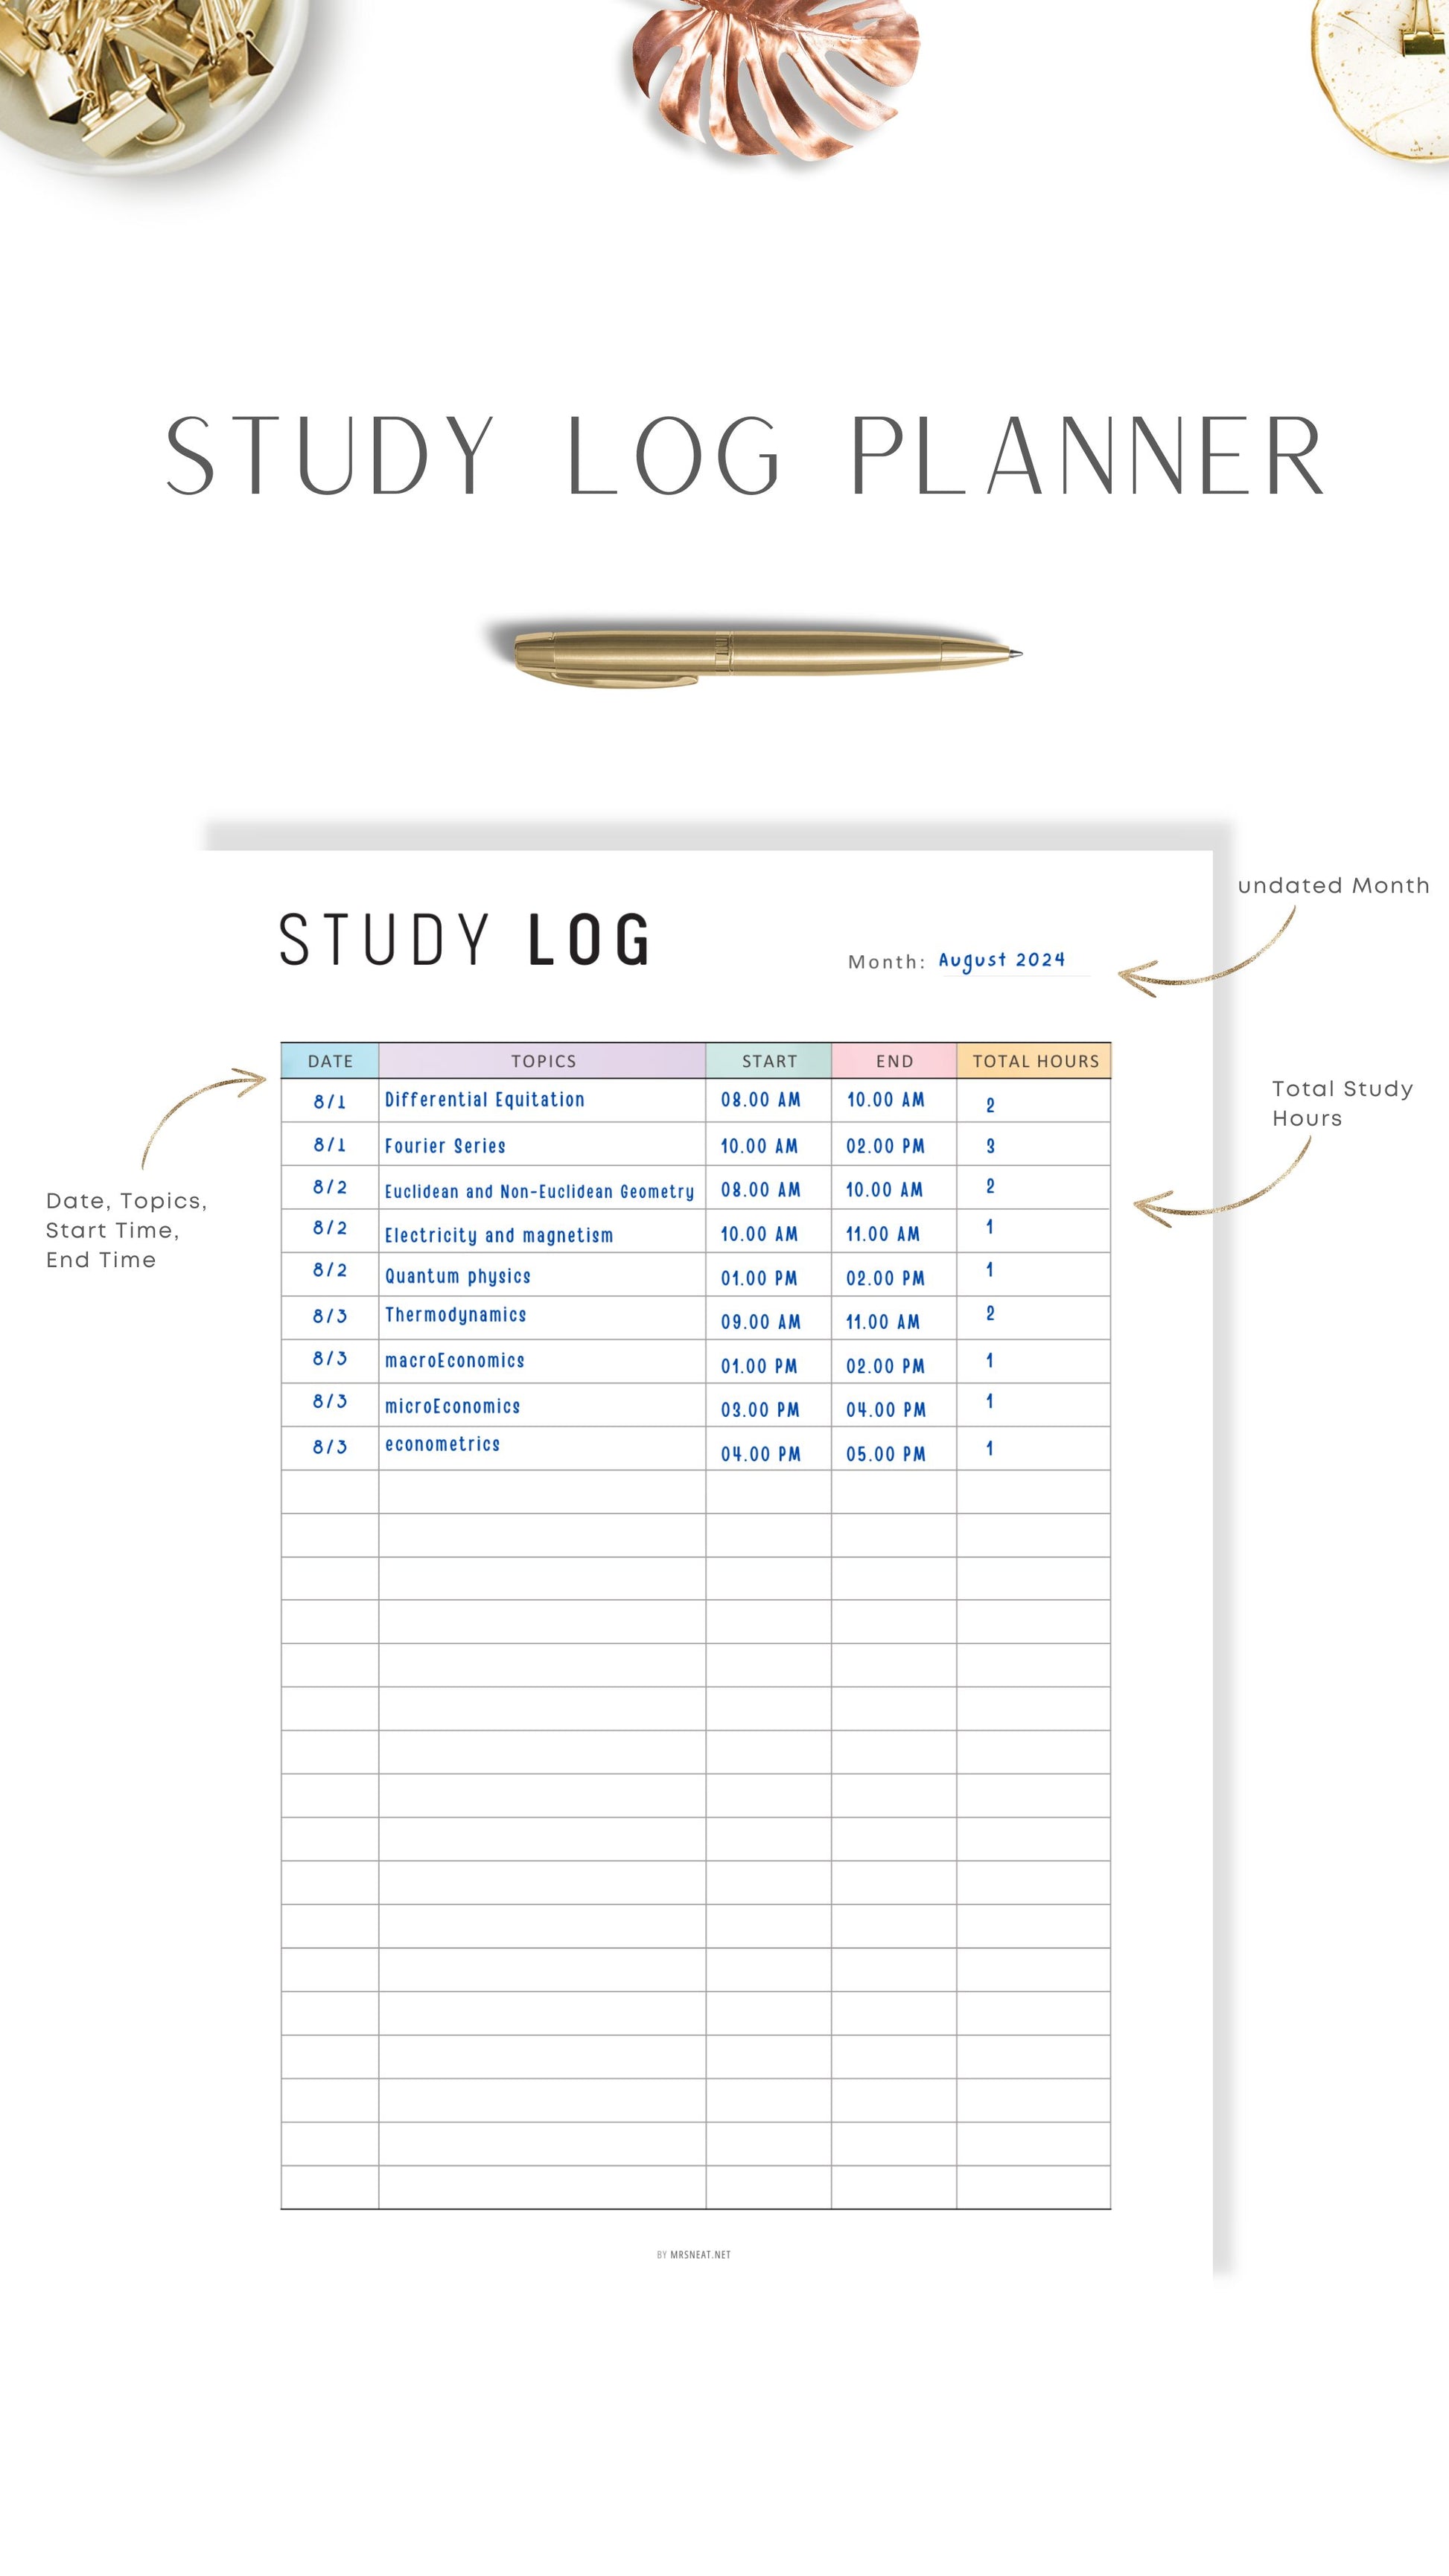 How to use Monthly Study Log Planner Printable